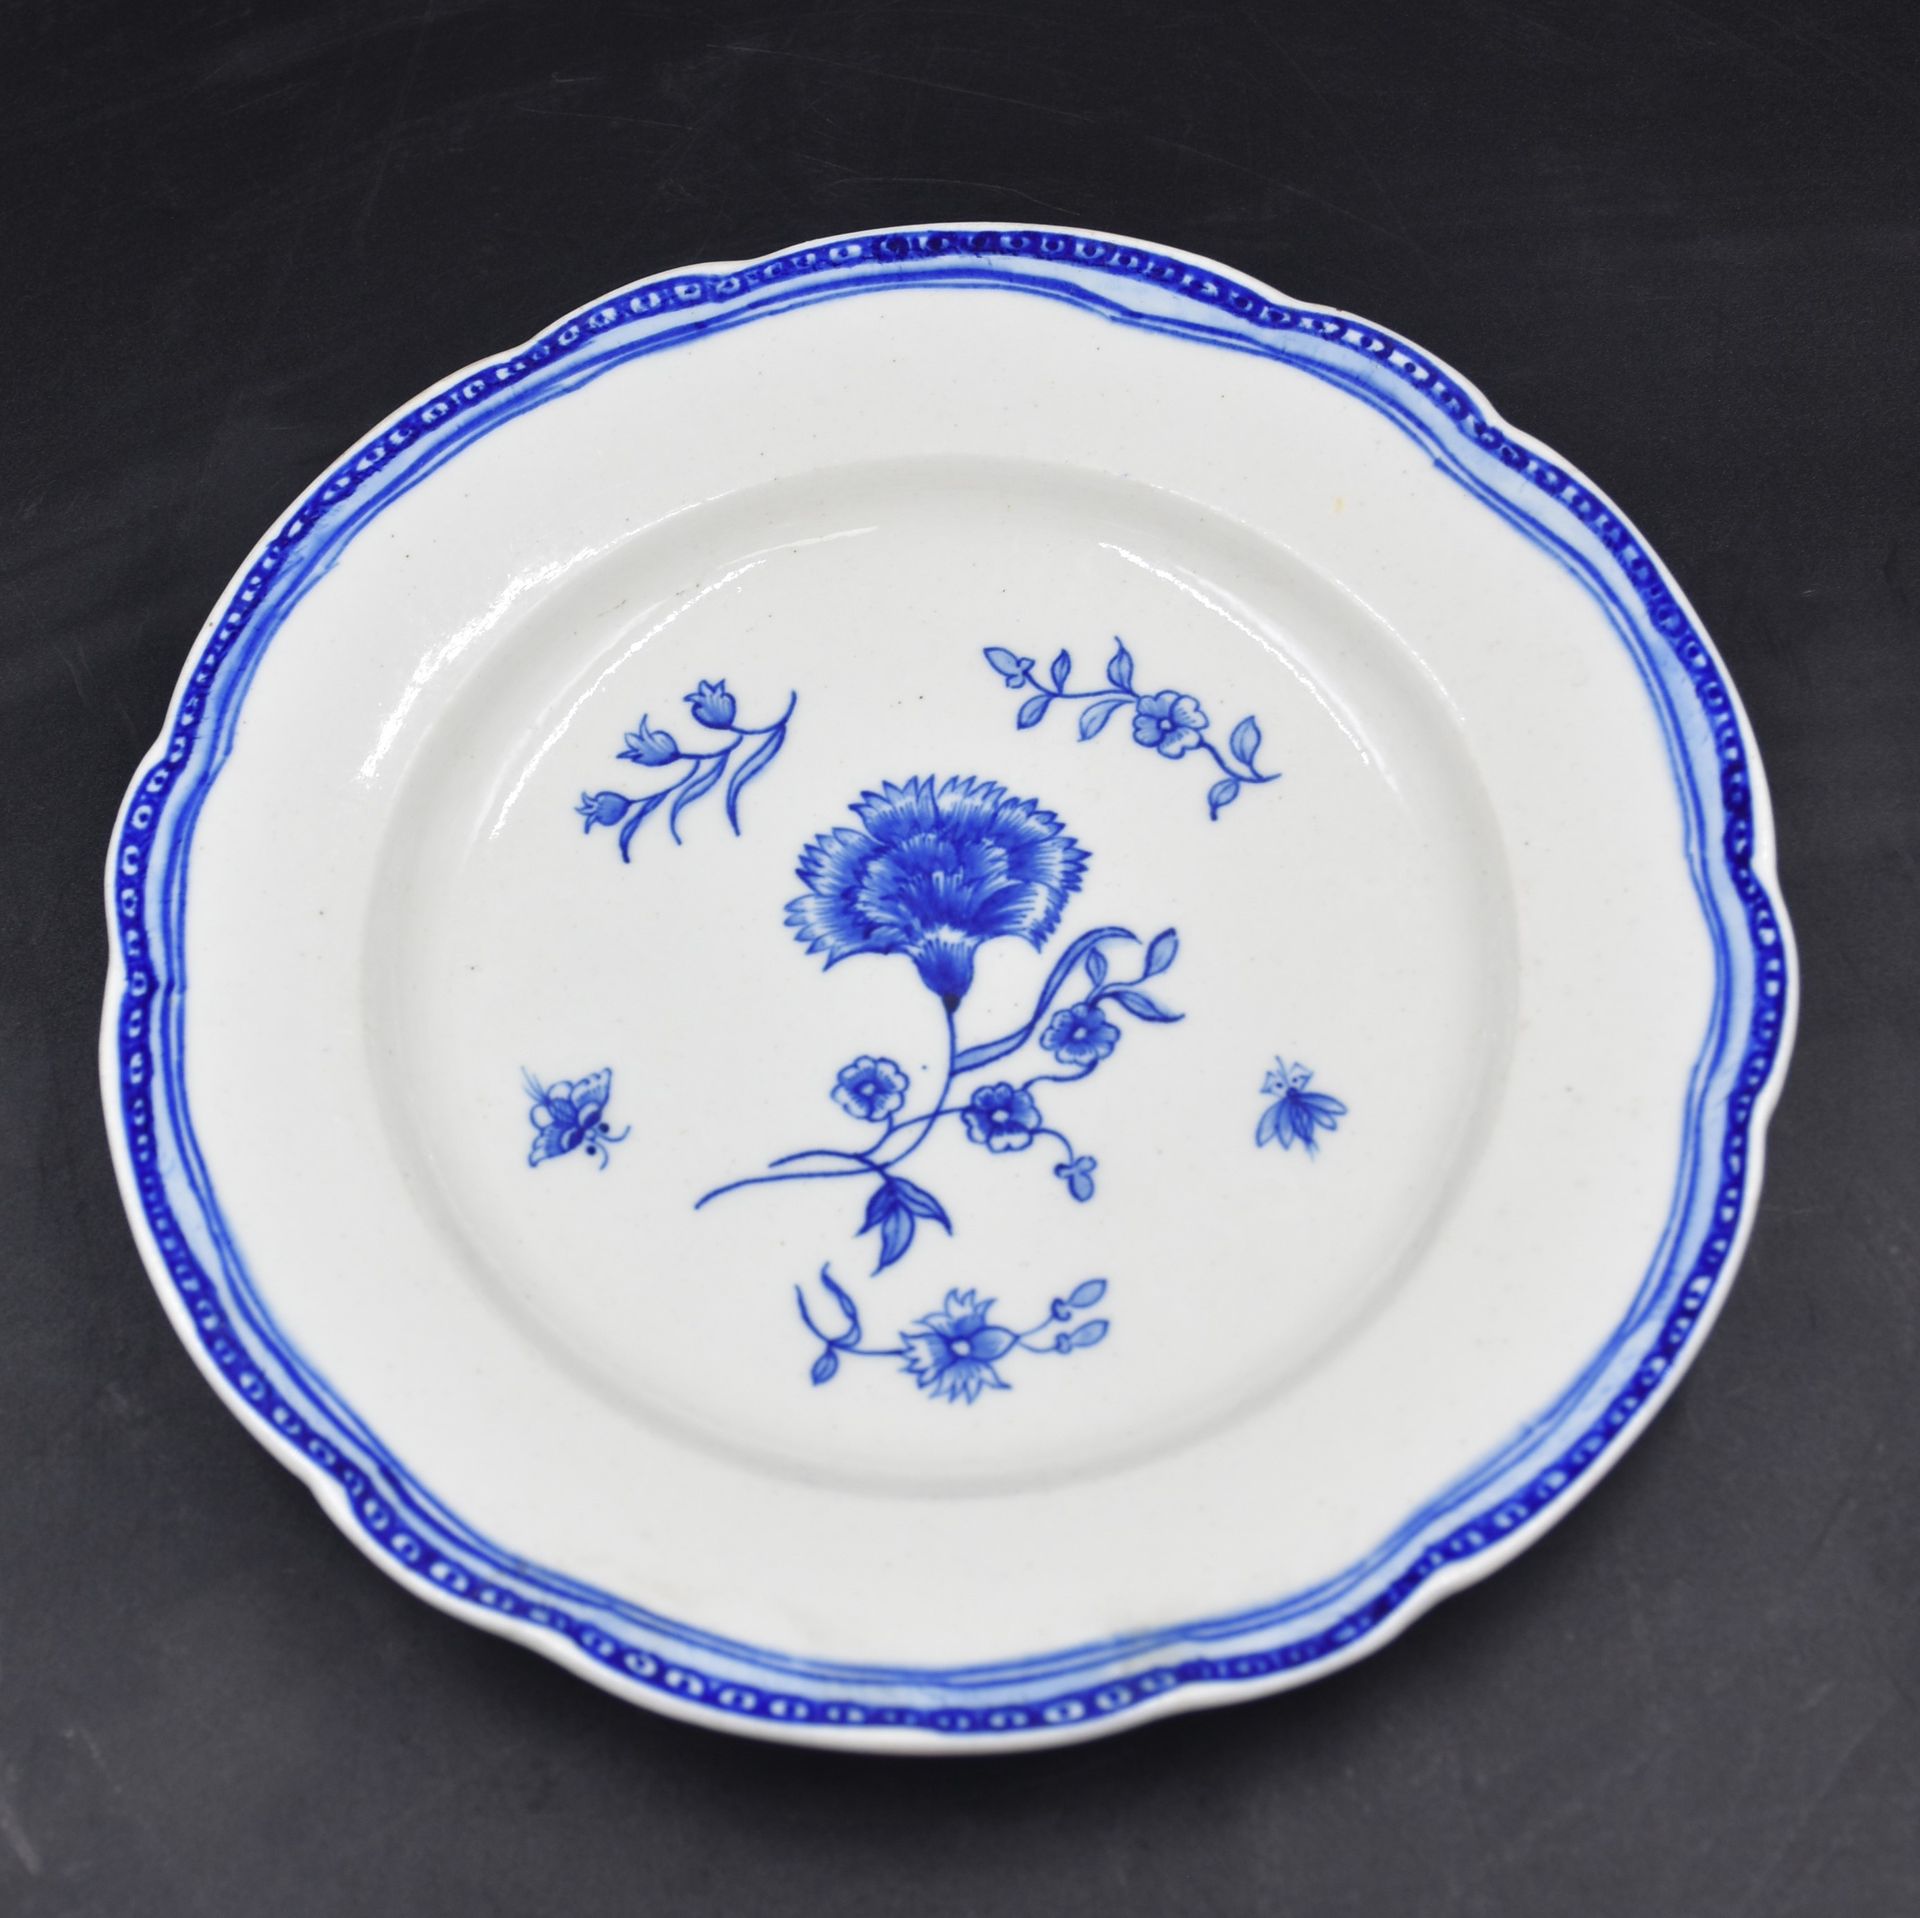 Null Plate in porcelain of tournai decorated with carnation. 

NL: Doorniks pors&hellip;